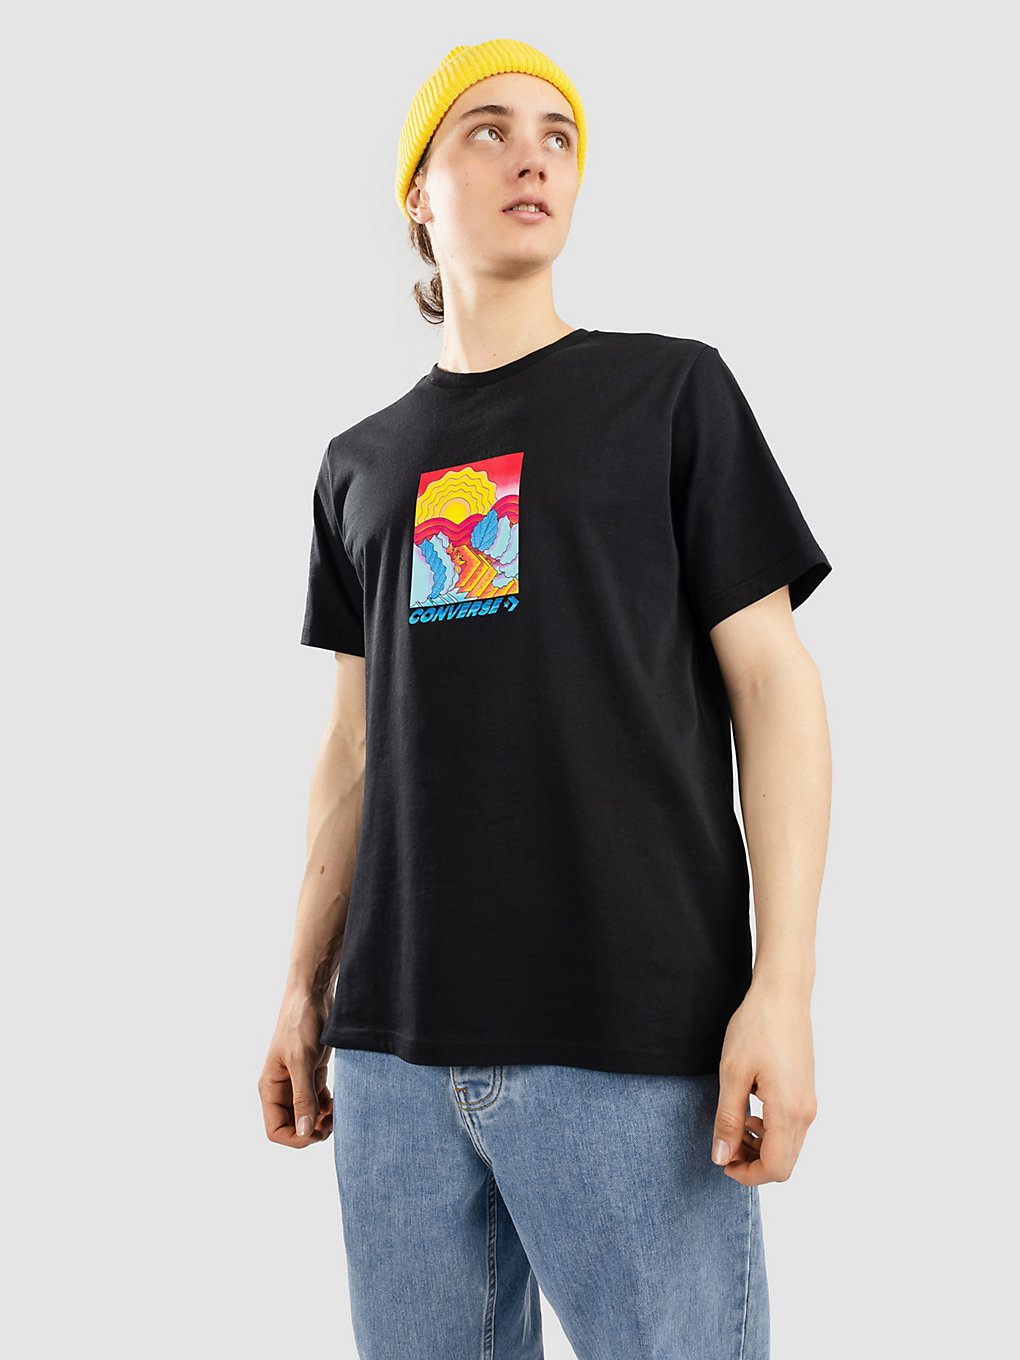 converse layers of earth t-shirt converse black